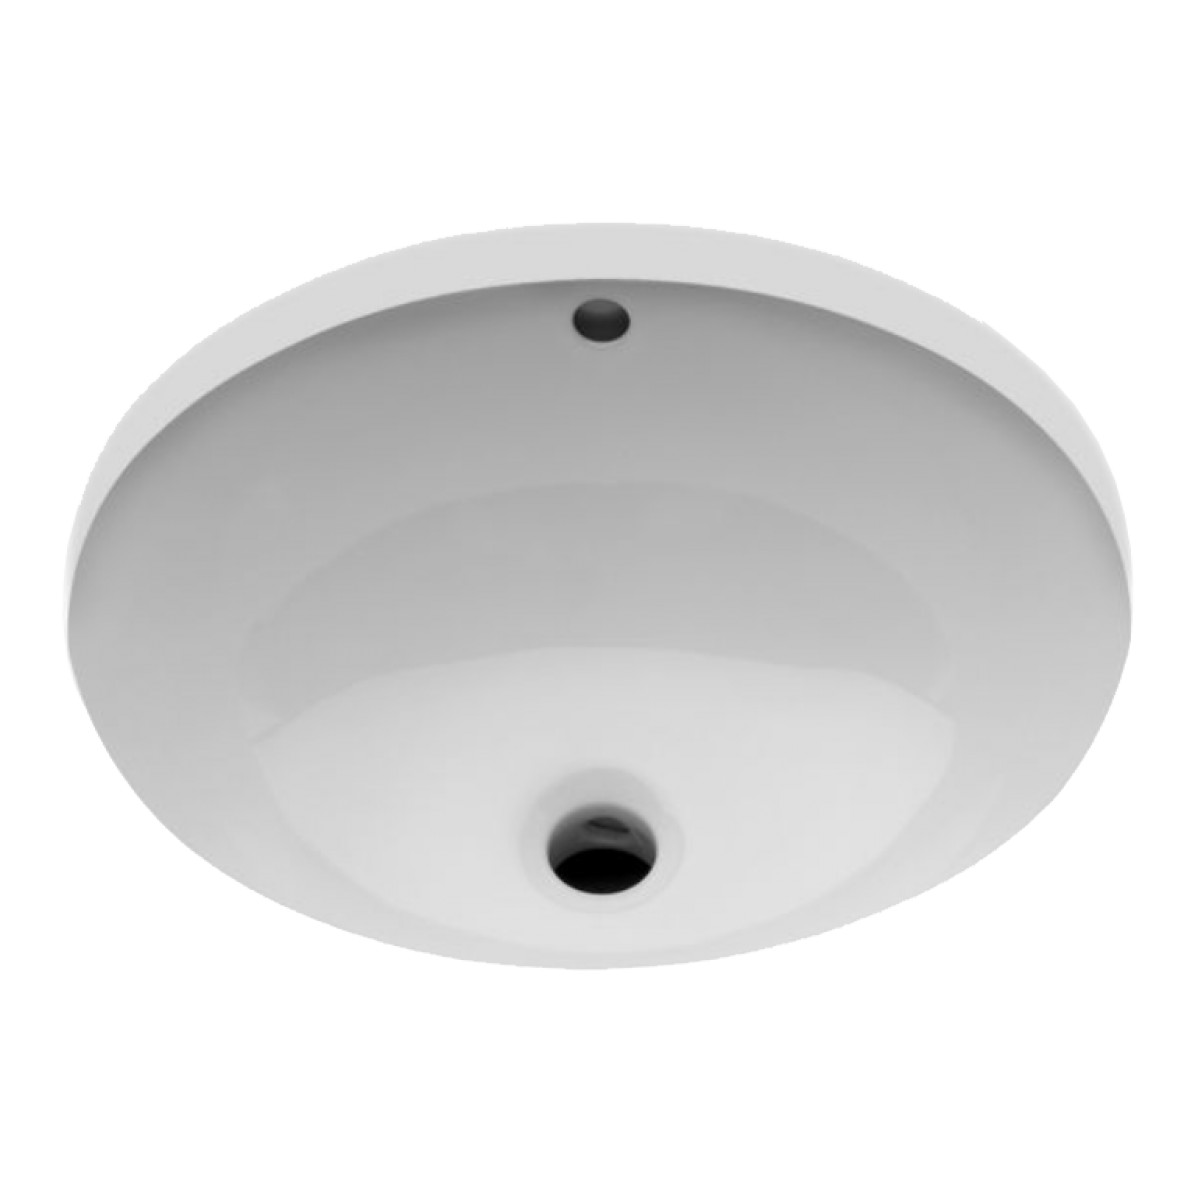 Saxby Drop In or Undermount Oval Double Glazed Vitreous China Lavatory Sink 17 13/16" x 15 1/16" x 7 11/16"